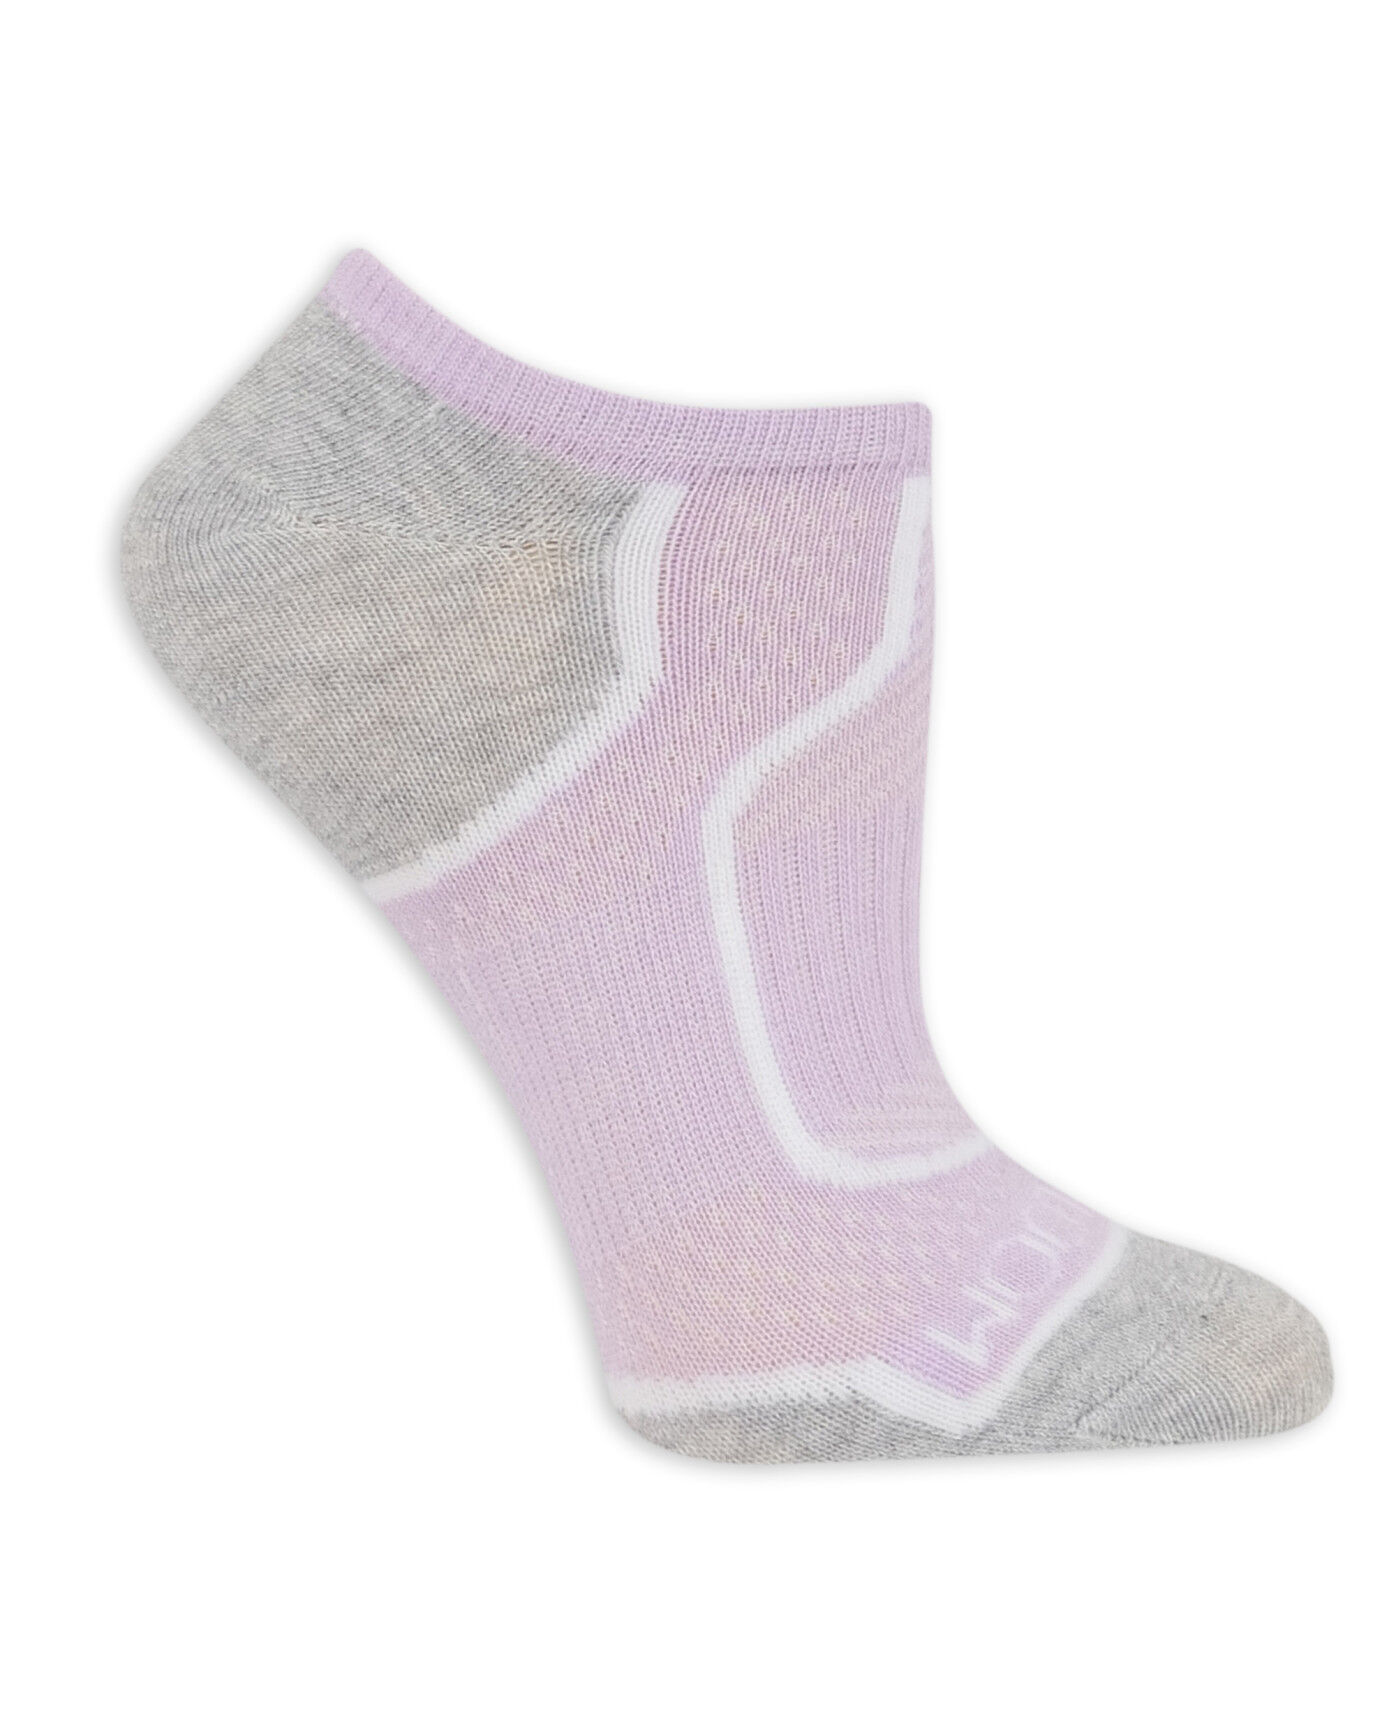 Fruit of the Loom Womens 6 Pack No Show Socks 